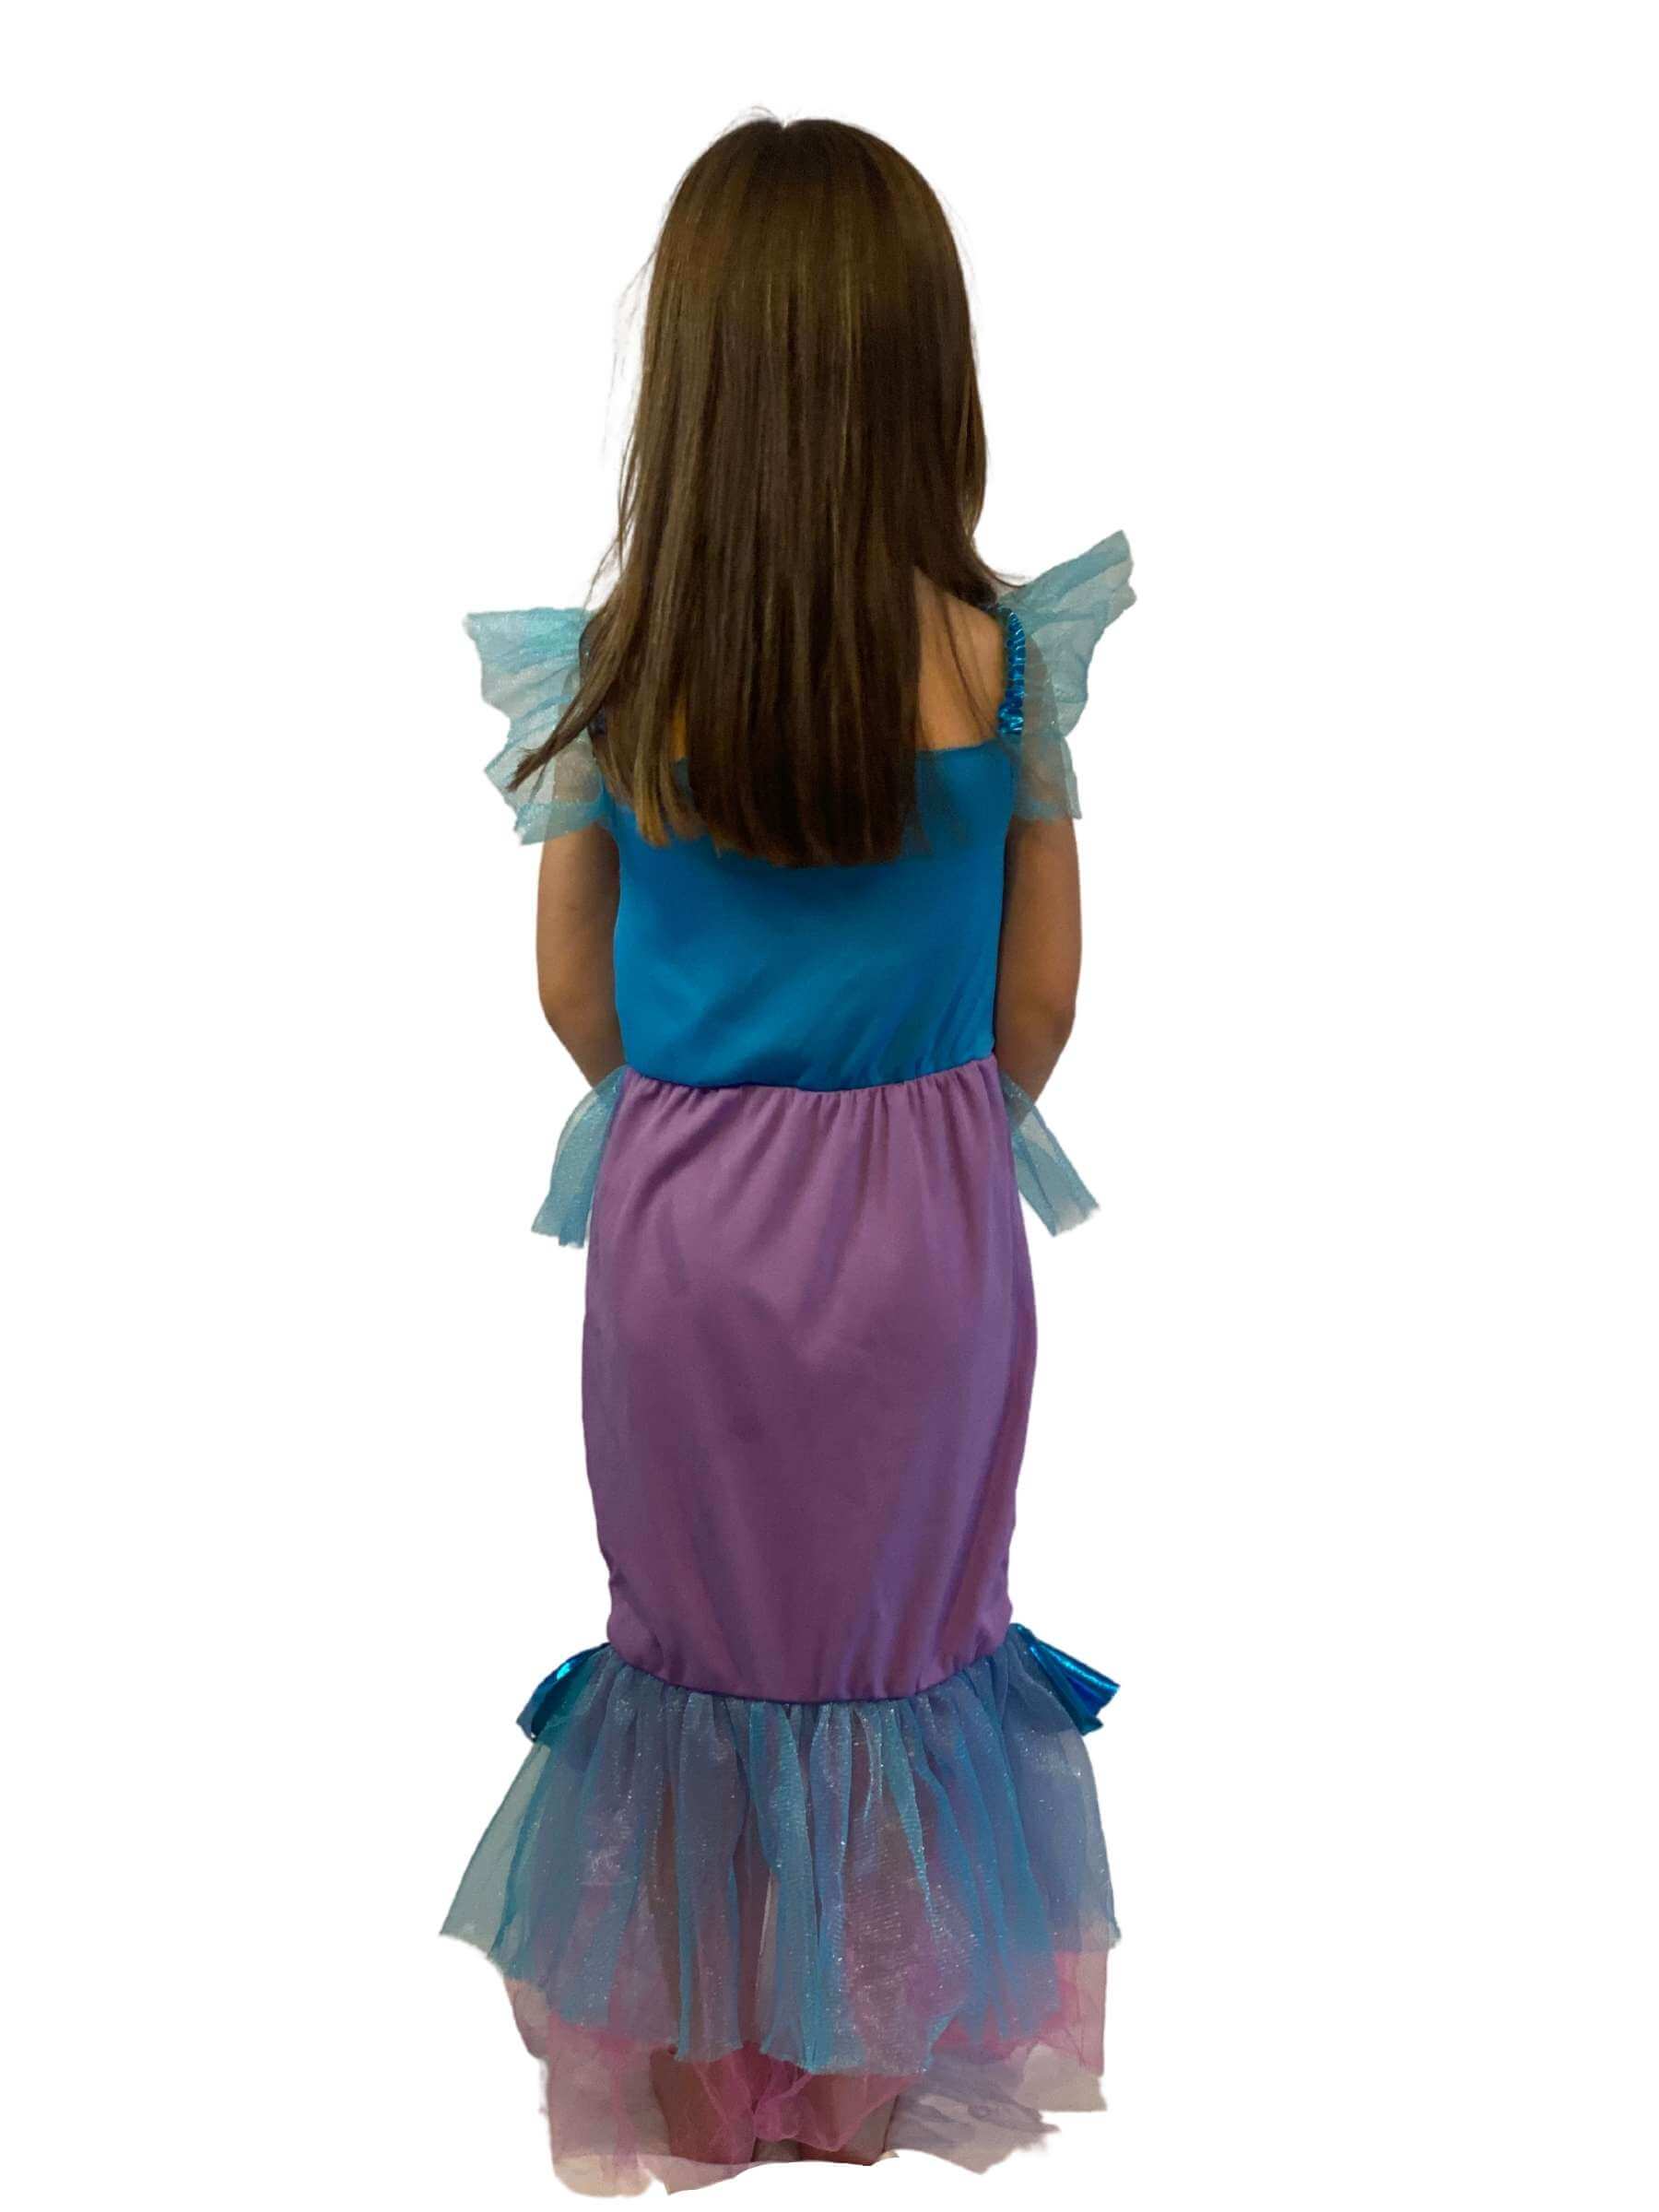 The back of a girl wearing the mermaid dress showing blue blue and purple back.